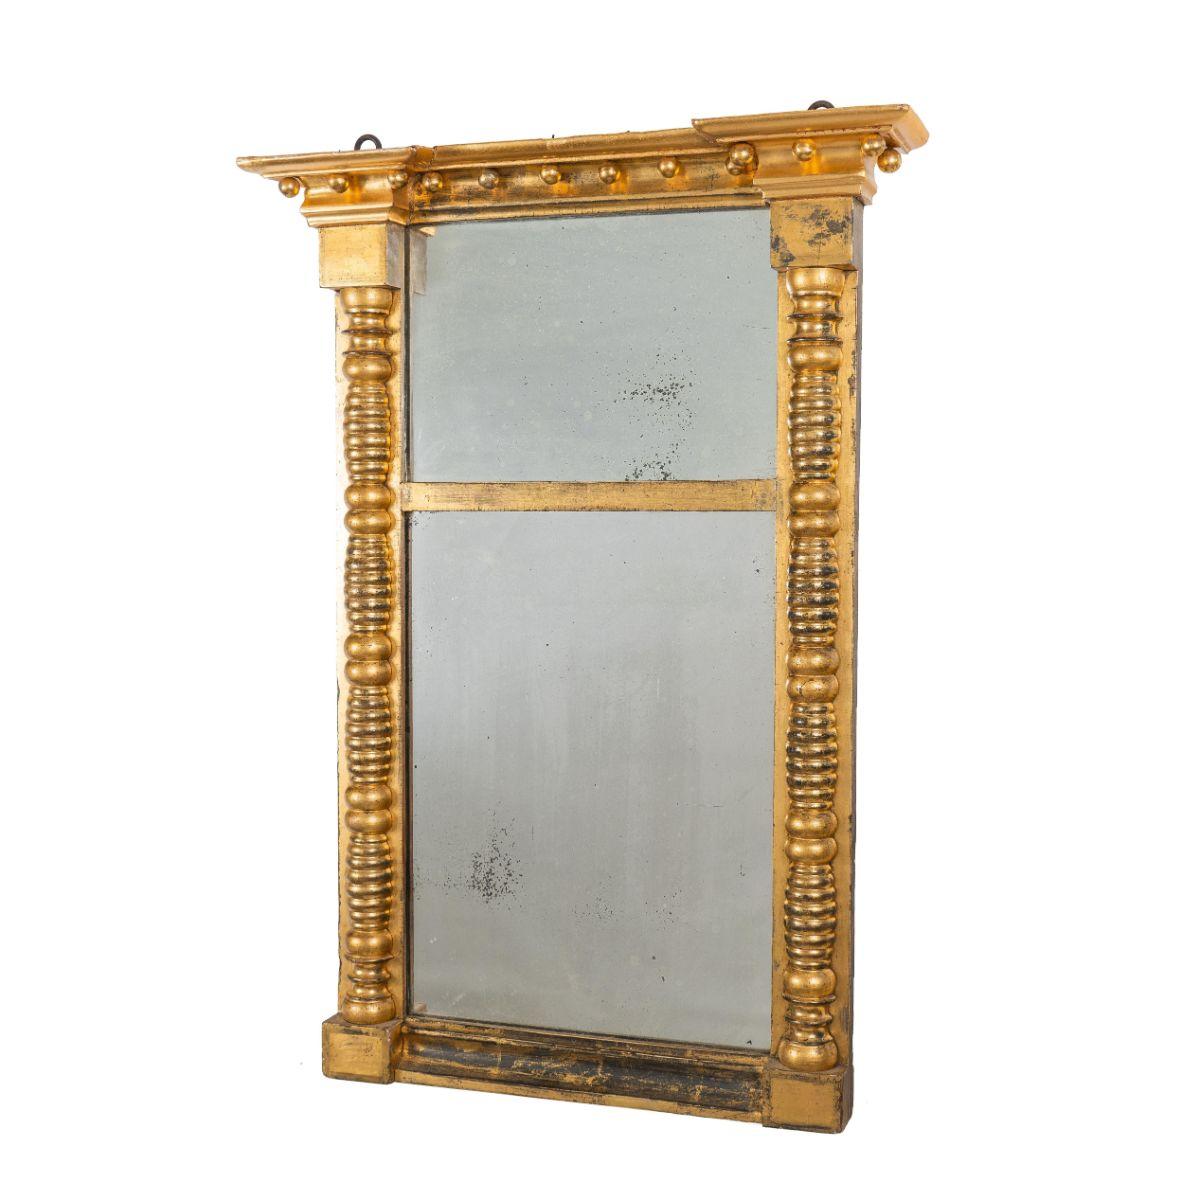 American Sheraton split pillar, gilt gesso, two part tabernacle looking glass with a projecting blocked cove cut cornice, fitted with 12 gilt balls. The frame retains its original gilt surface and mercury amalgam mirror.
American, New England,